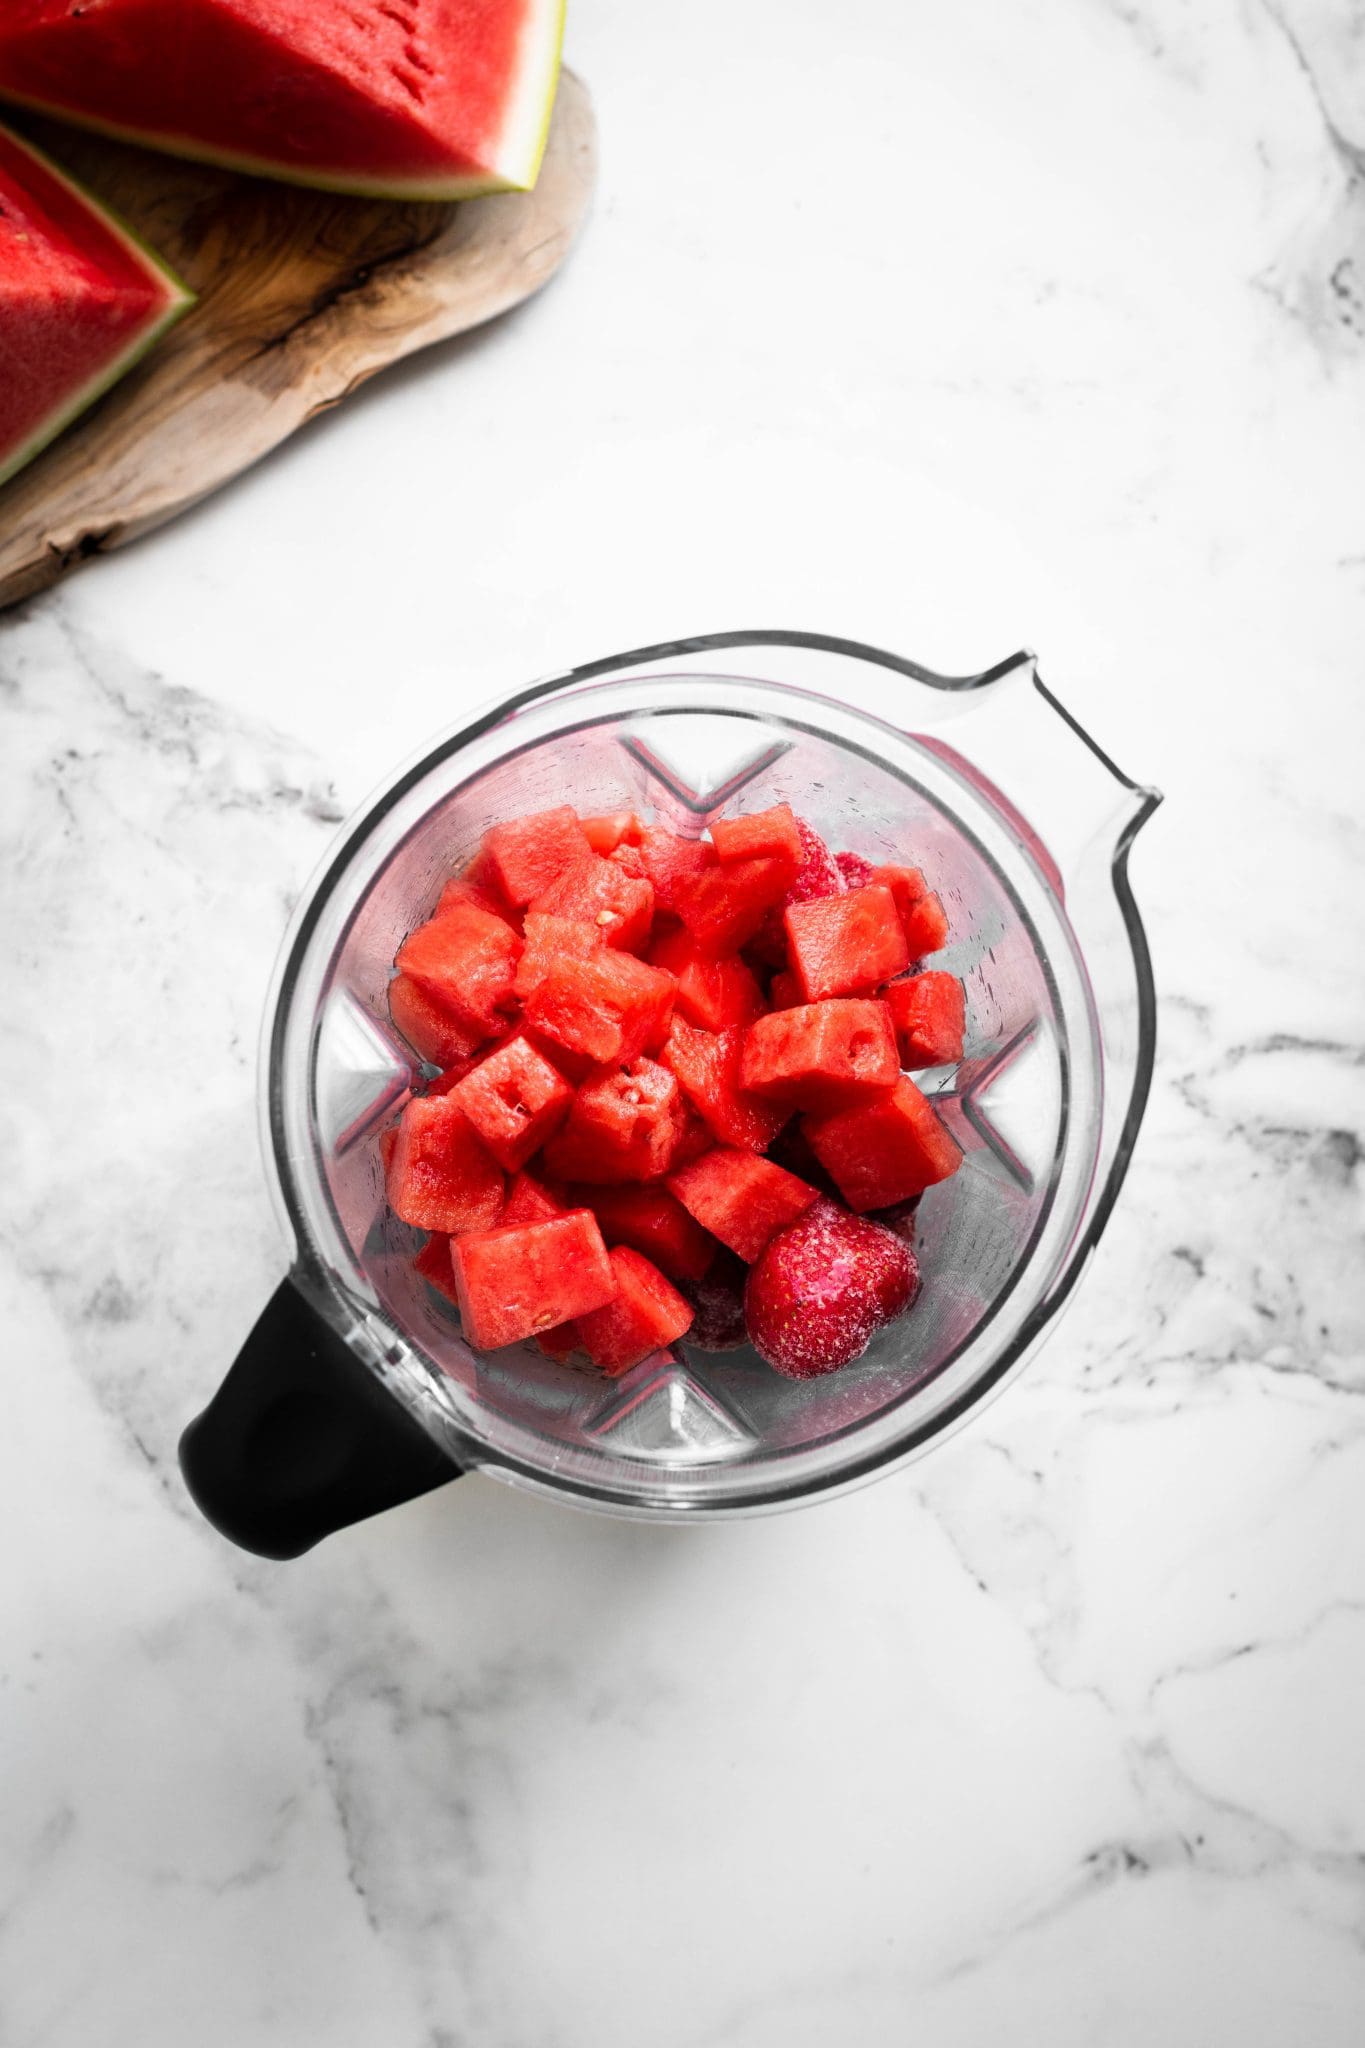 diced watermelon and strawberries in a blender